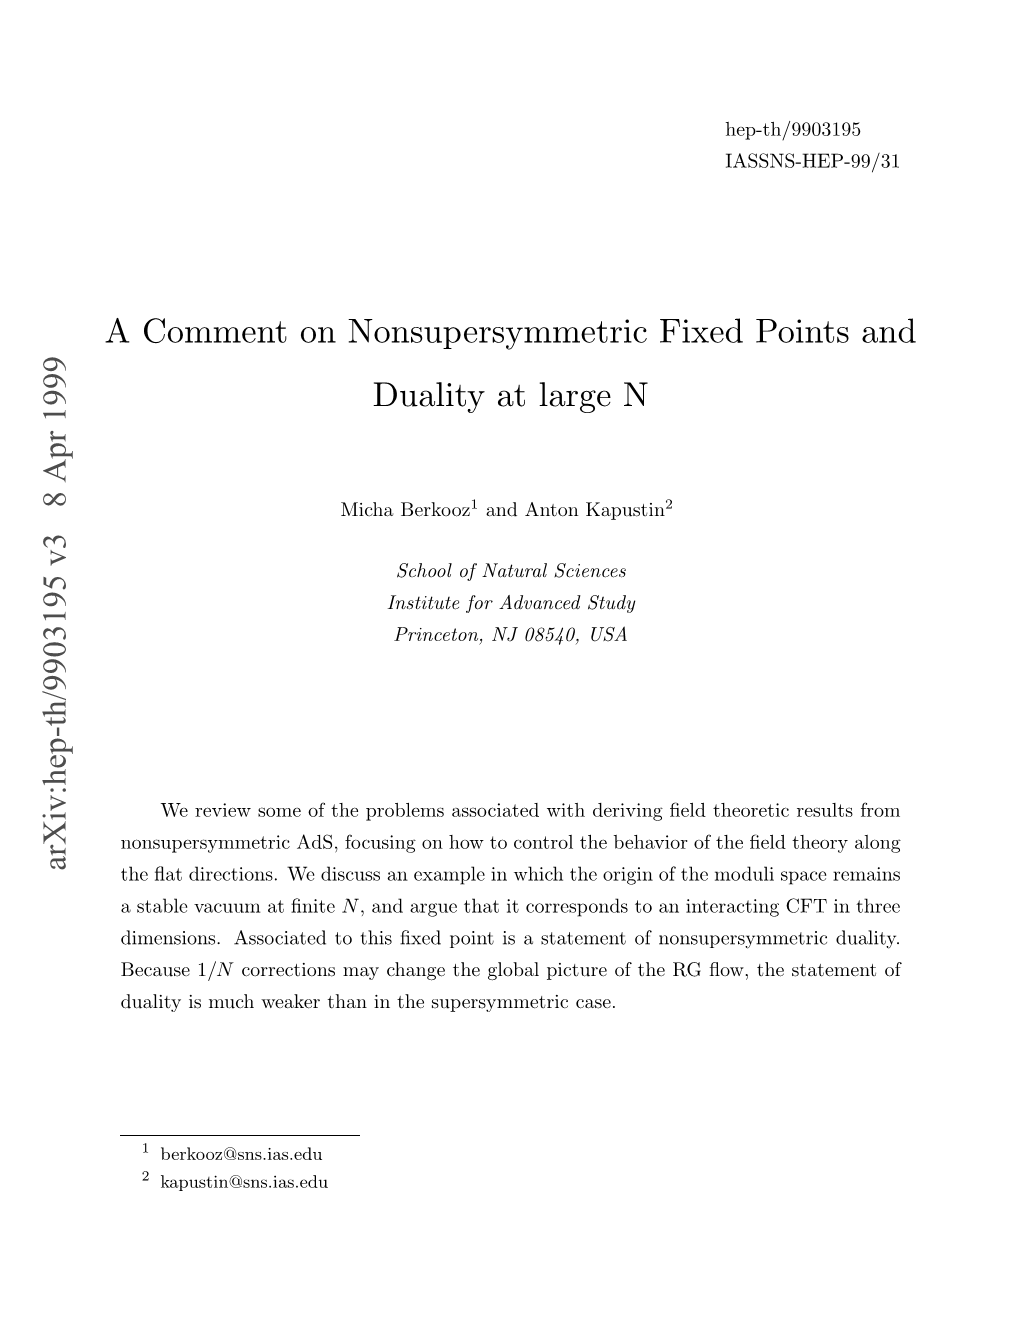 A Comment on Nonsupersymmetric Fixed Points and Duality at Large N